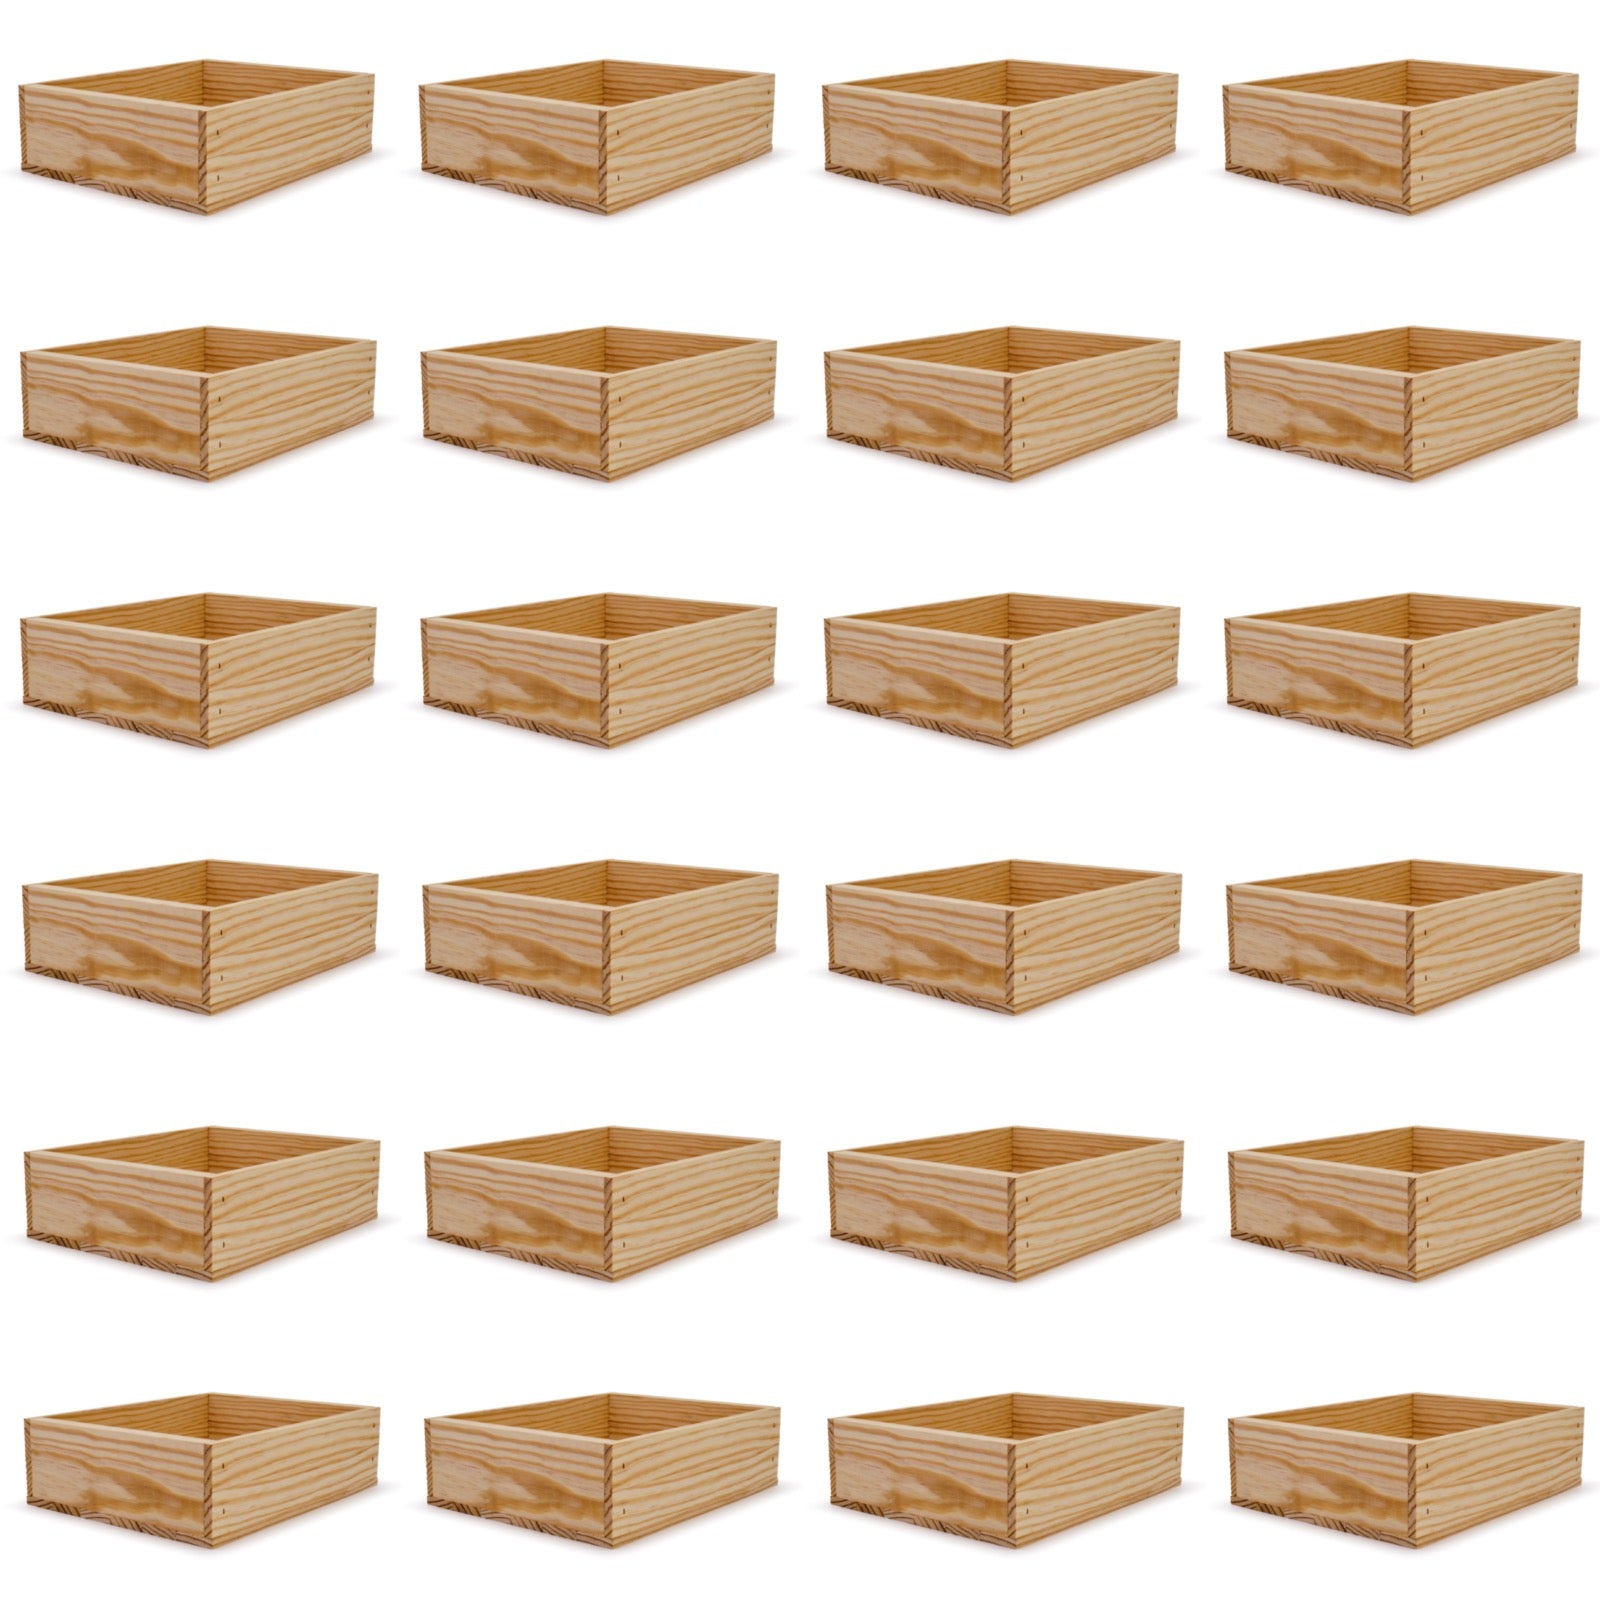 24 Small wooden crates 12x9.75x3.5